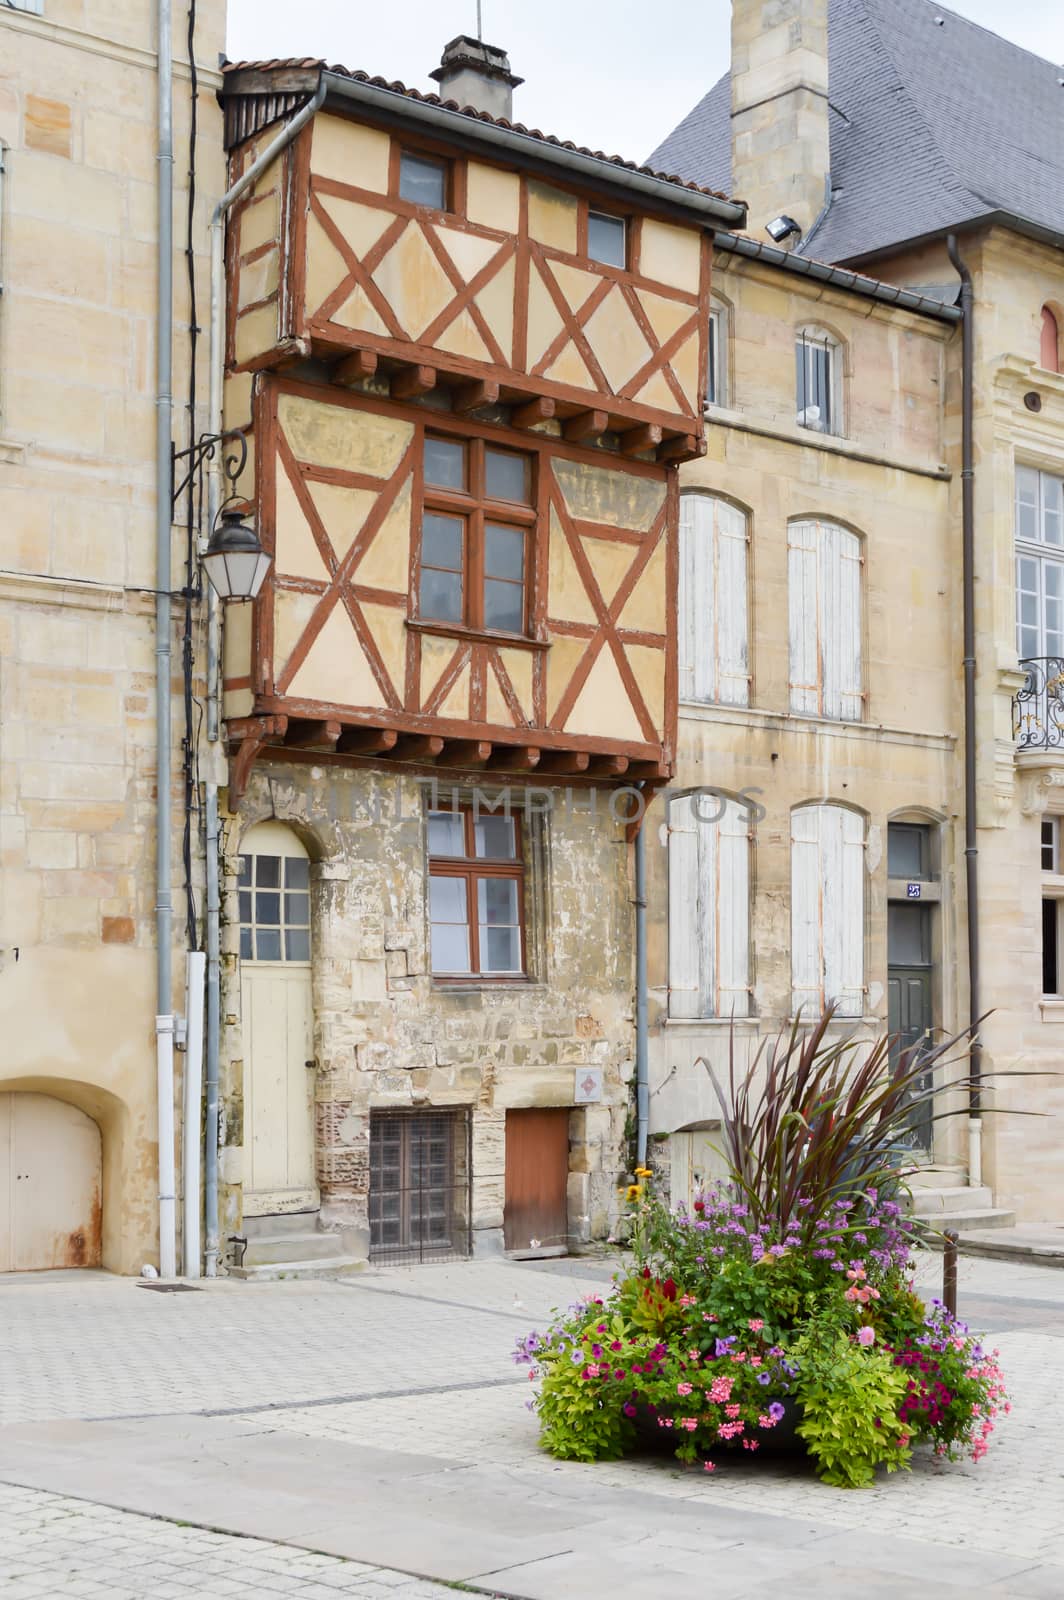 Half-timbered house on the Place de Bar le Duc in the department of the Meuse in France